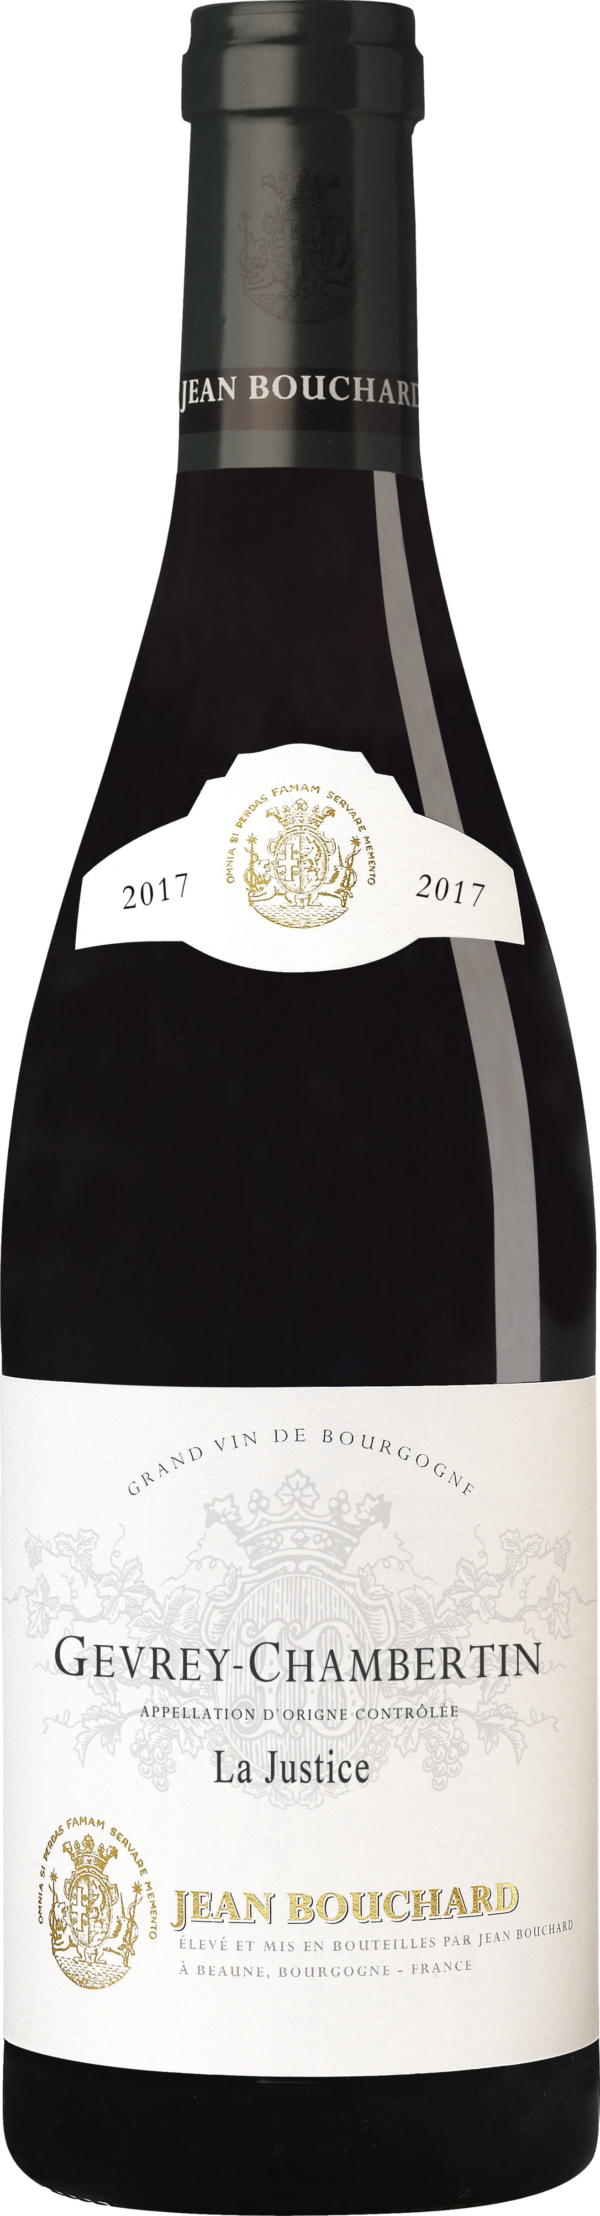 Product image of Jean Bouchard Gevrey-Chambertin La Justice 2017 from 8wines